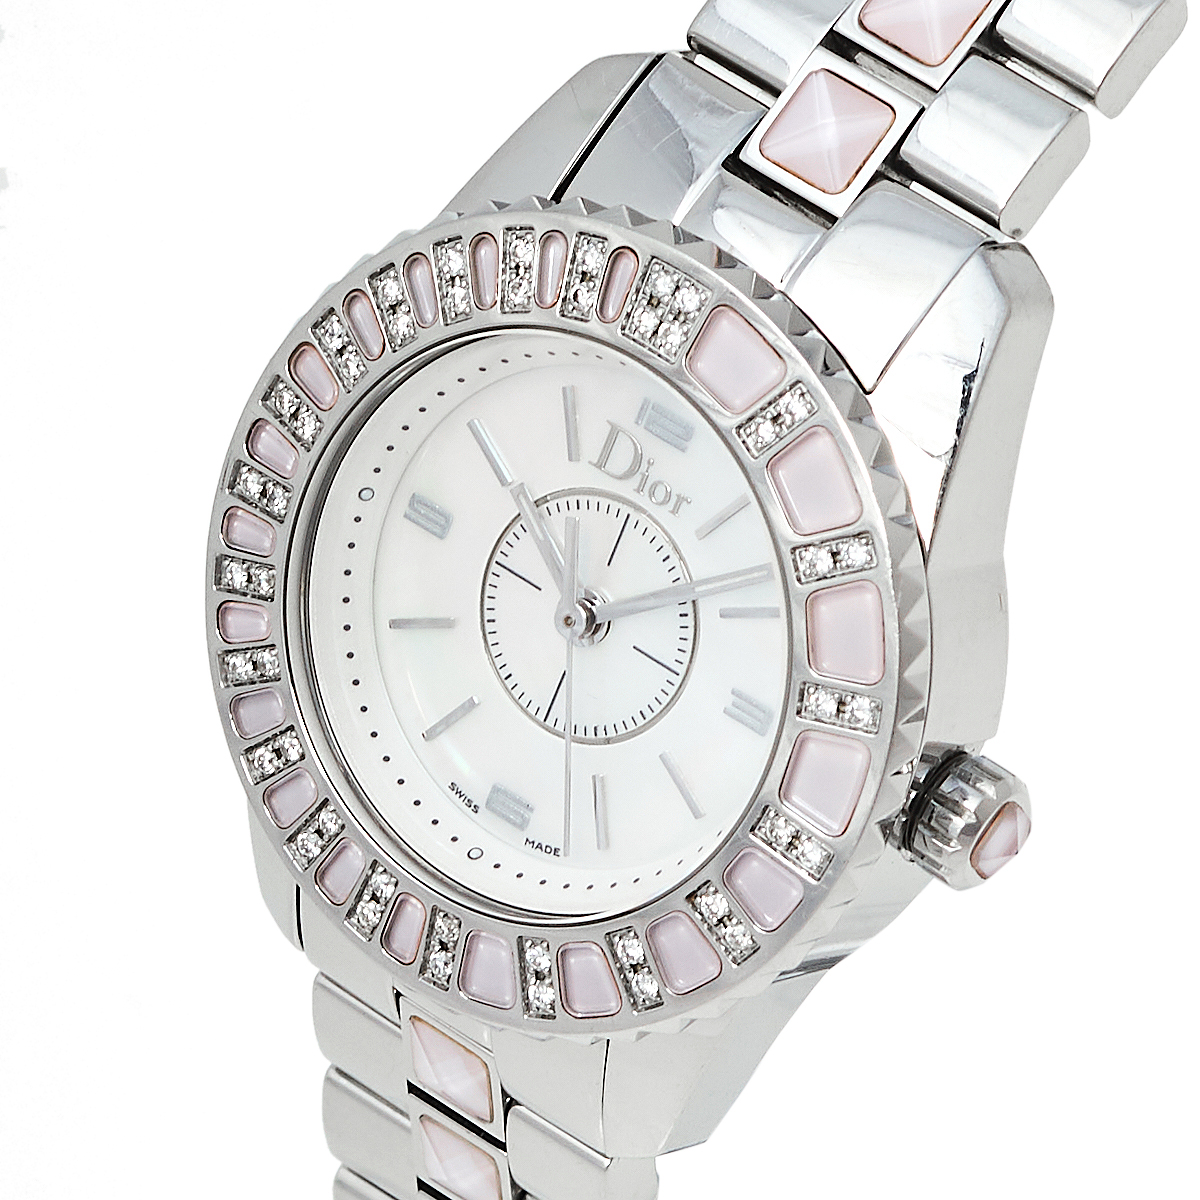 

Dior Mother of Pearl Stainless Steel Diamonds Christal CD112111M001 Women's Wristwatch, White